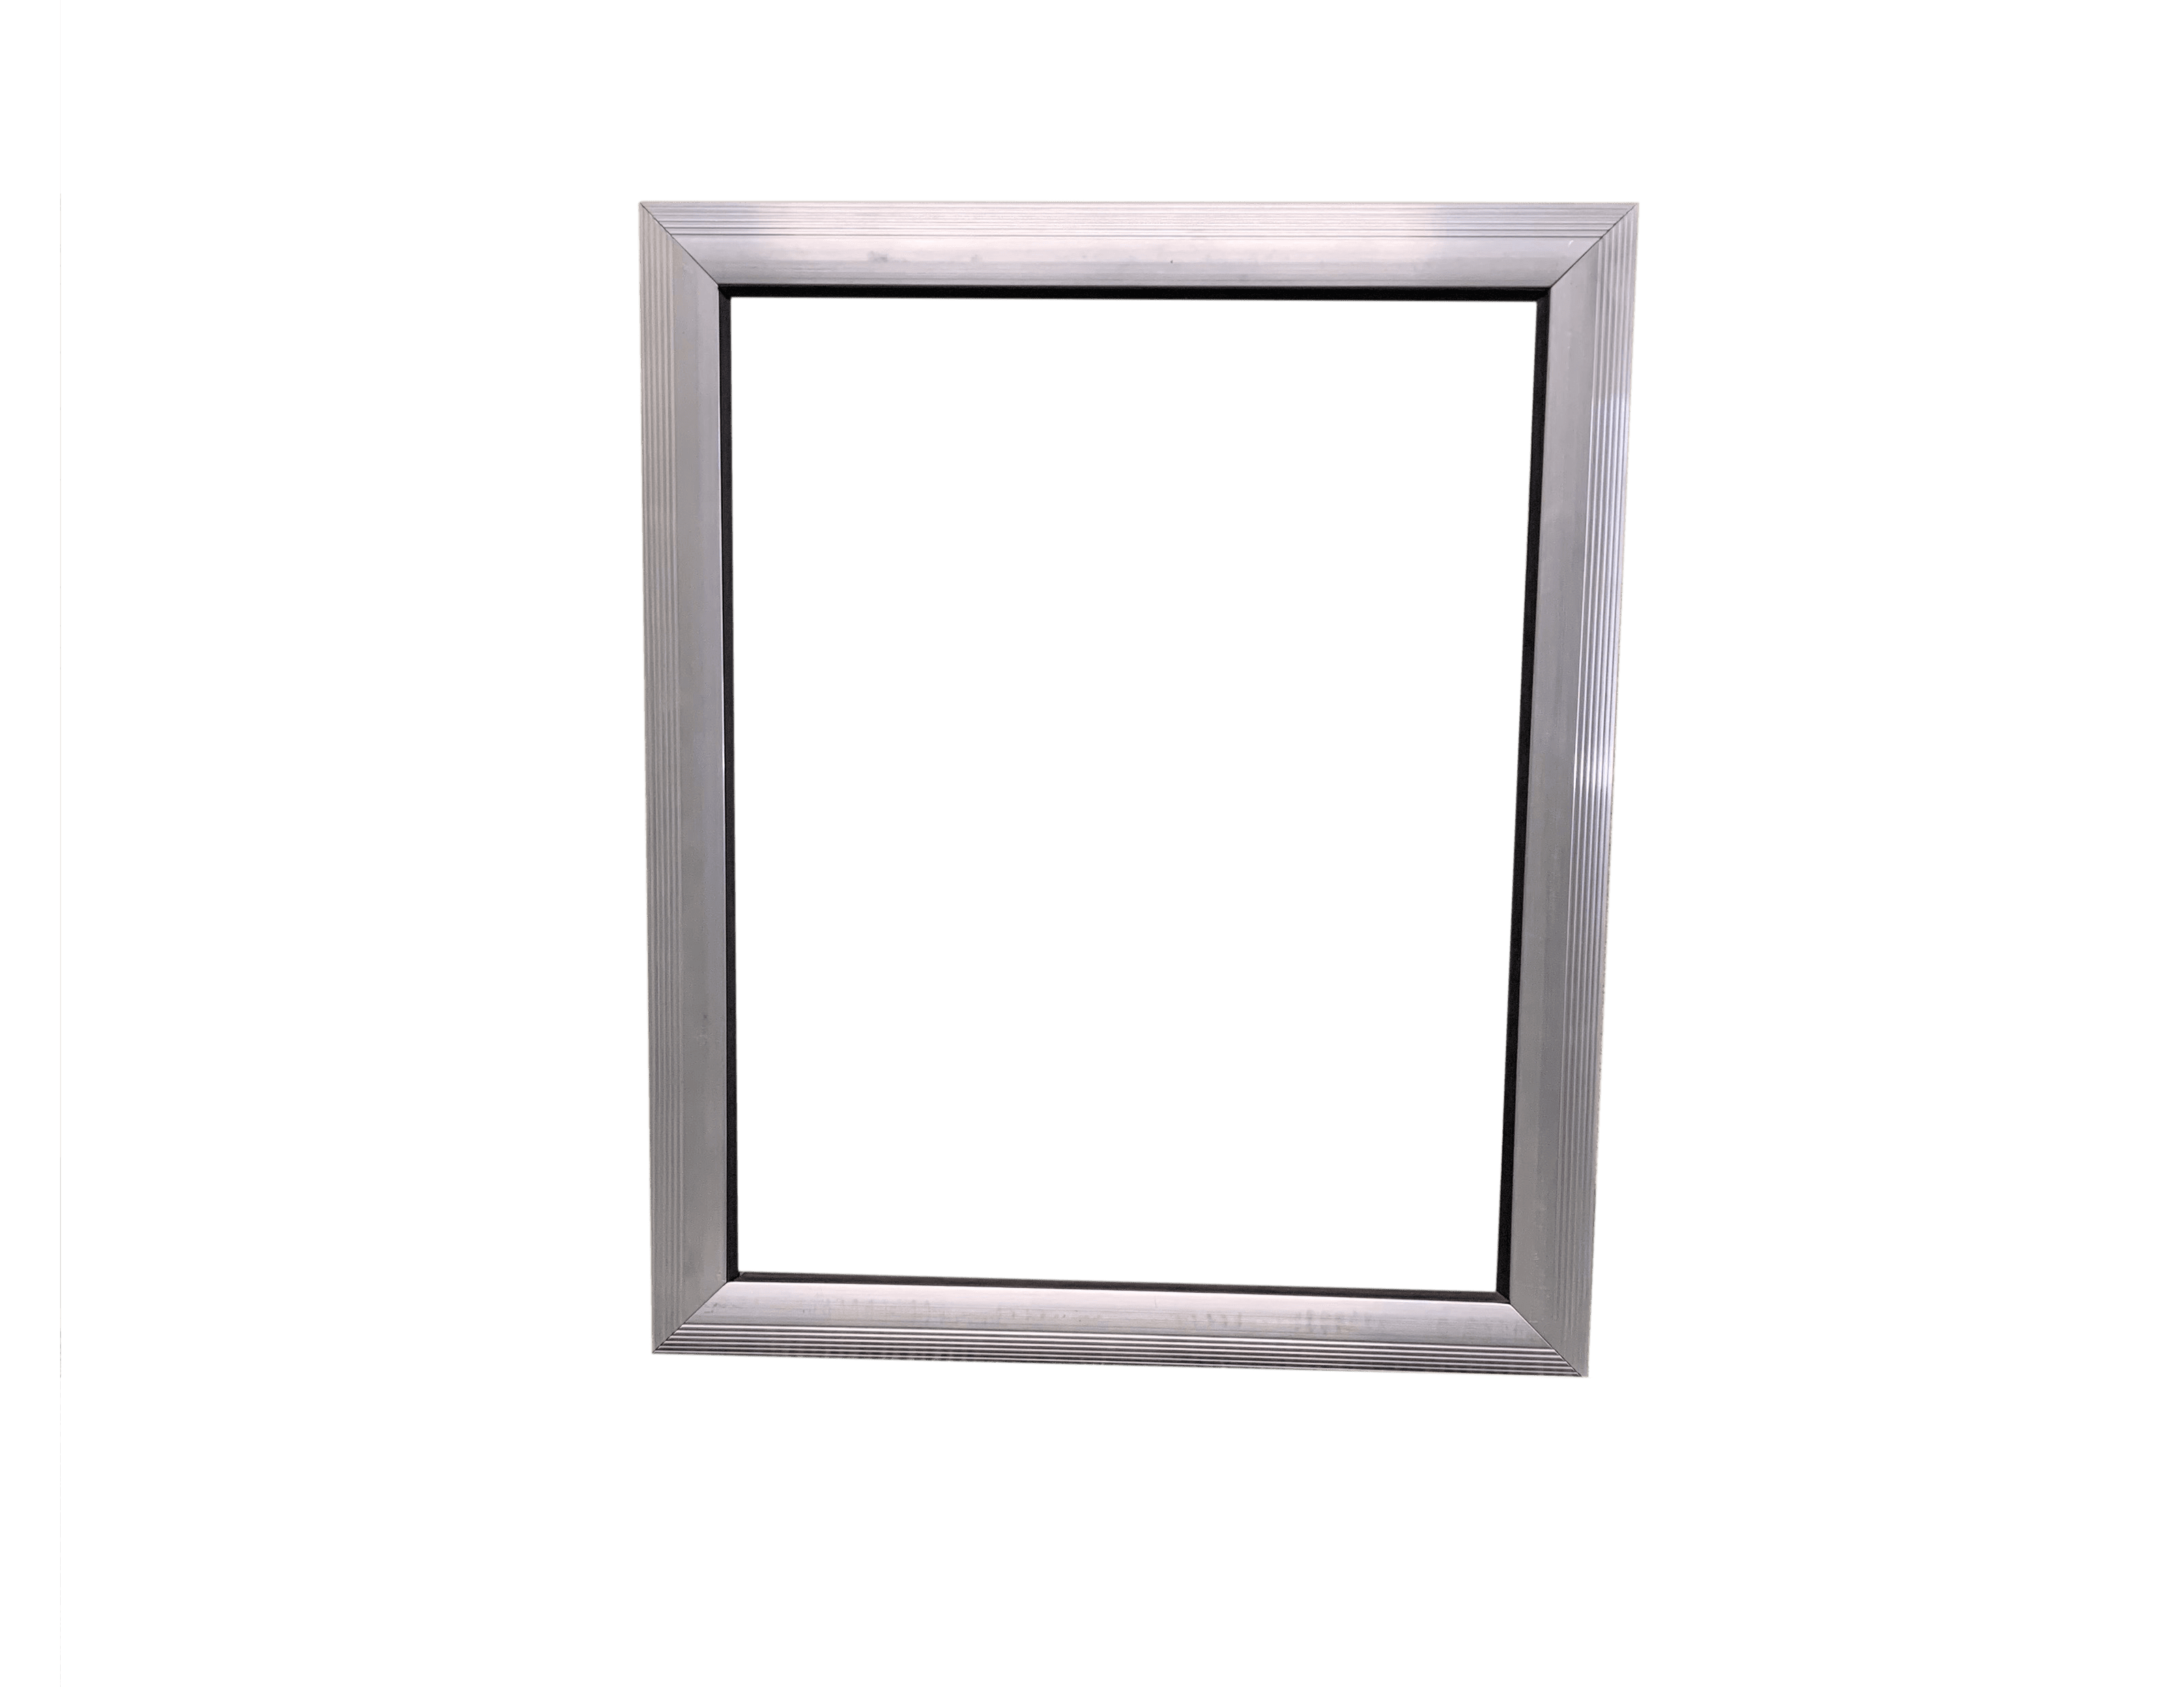 Saginaw Control SCE-AW2620SG Viewing Window - Extruded Aluminum Safety Glass, Height:30.00", Width:24.00", Depth:0.98", 